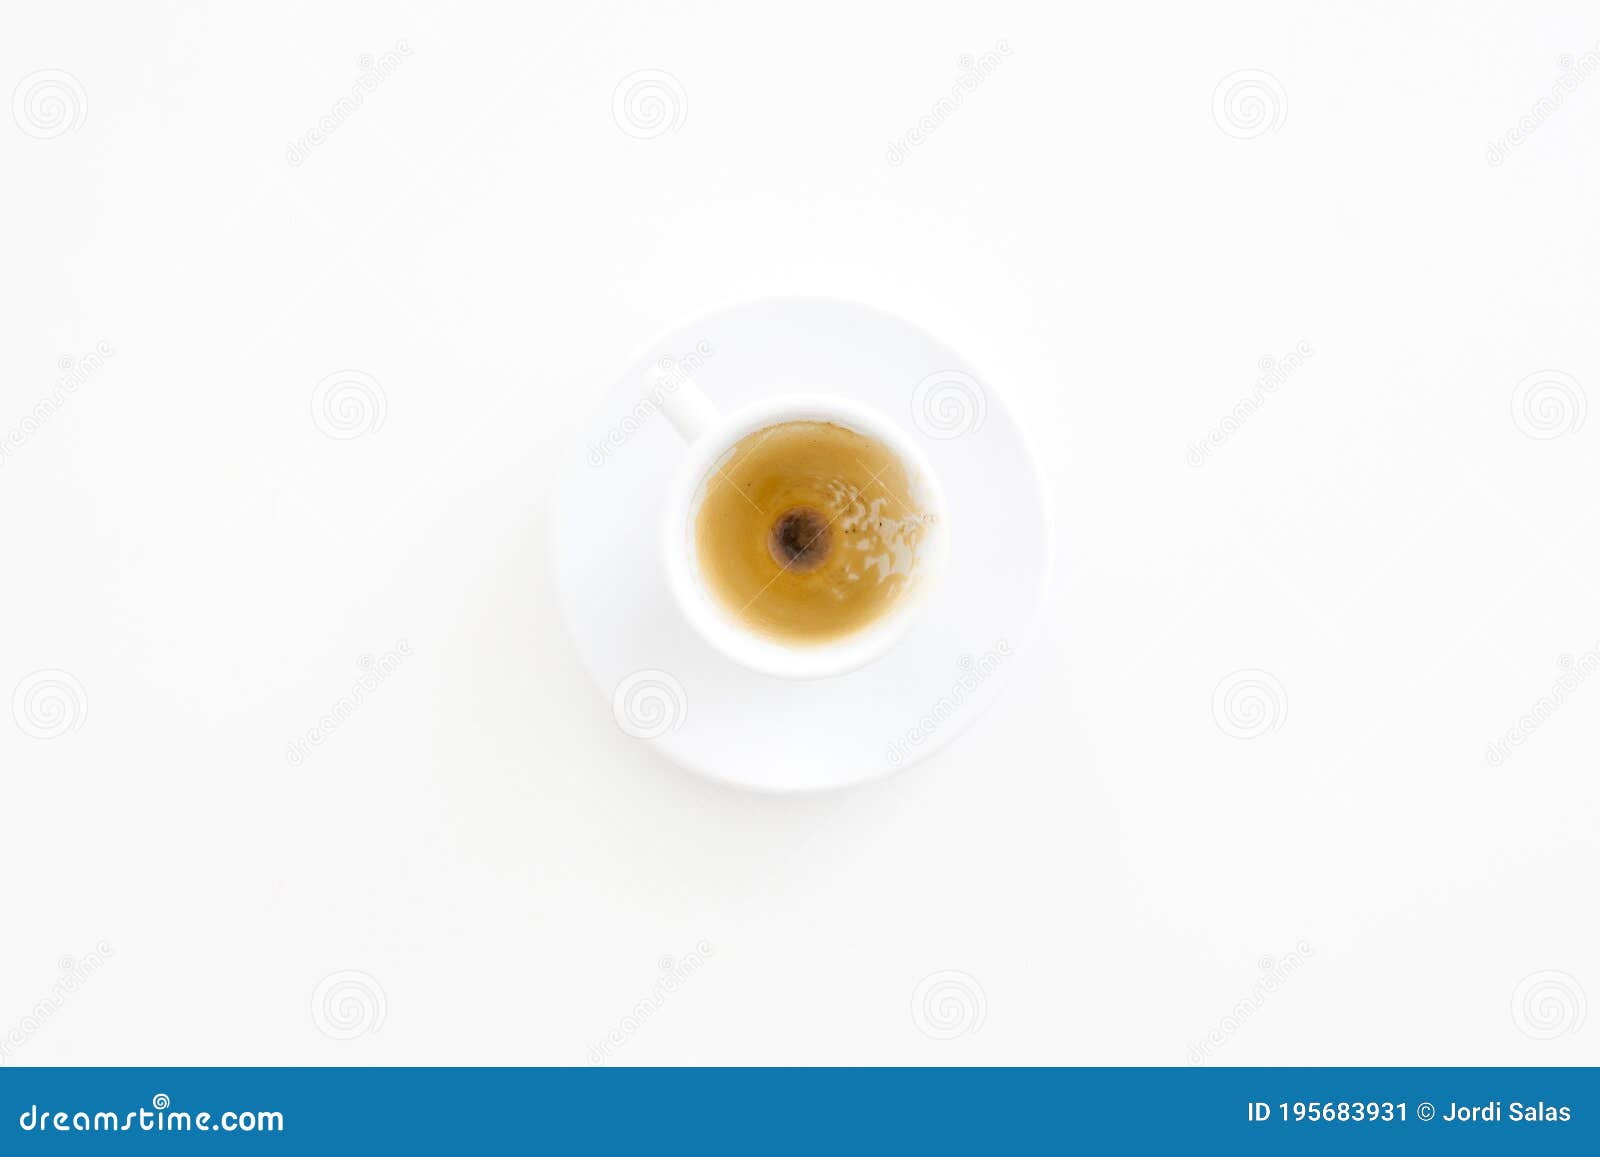 finished cup of espresso coffee